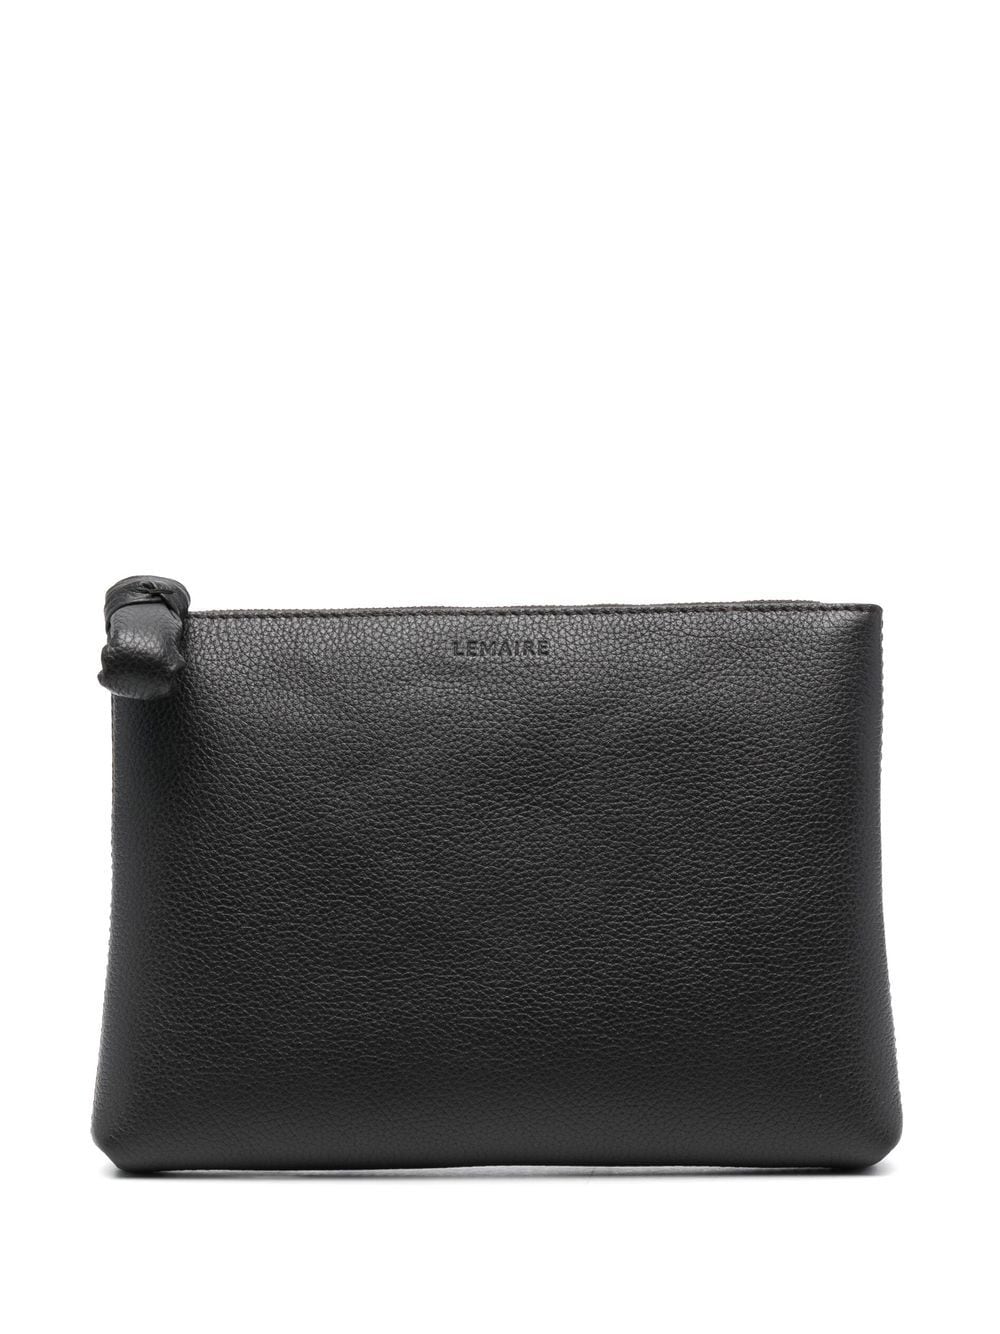 LEMAIRE logo-debossed Leather Clutch Bag - Farfetch